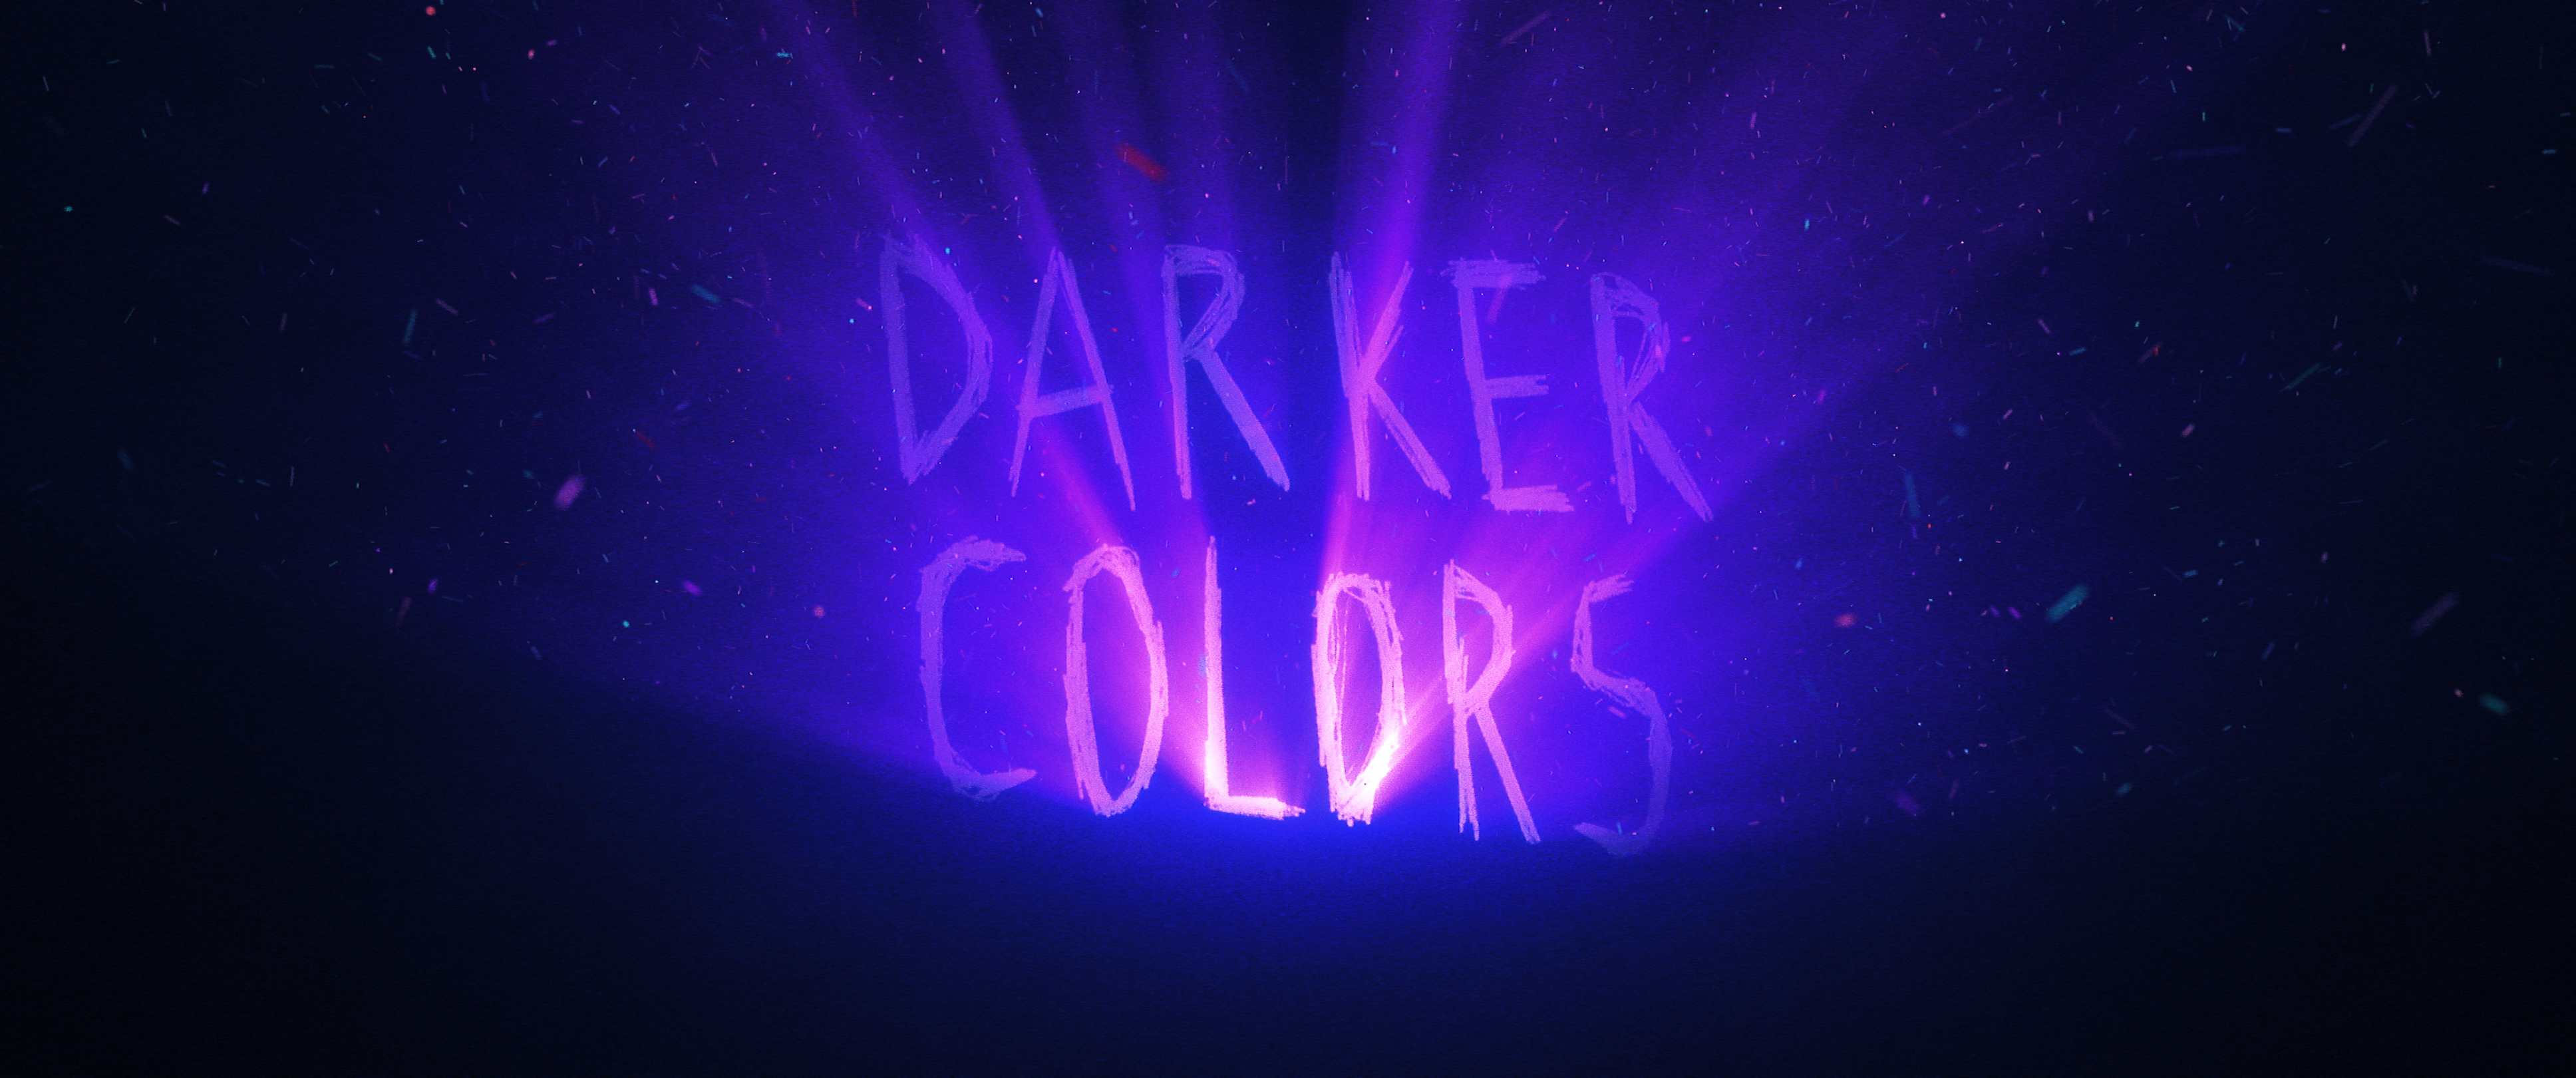 "Darker Colors," a short film by Seth Worley and Red Giant